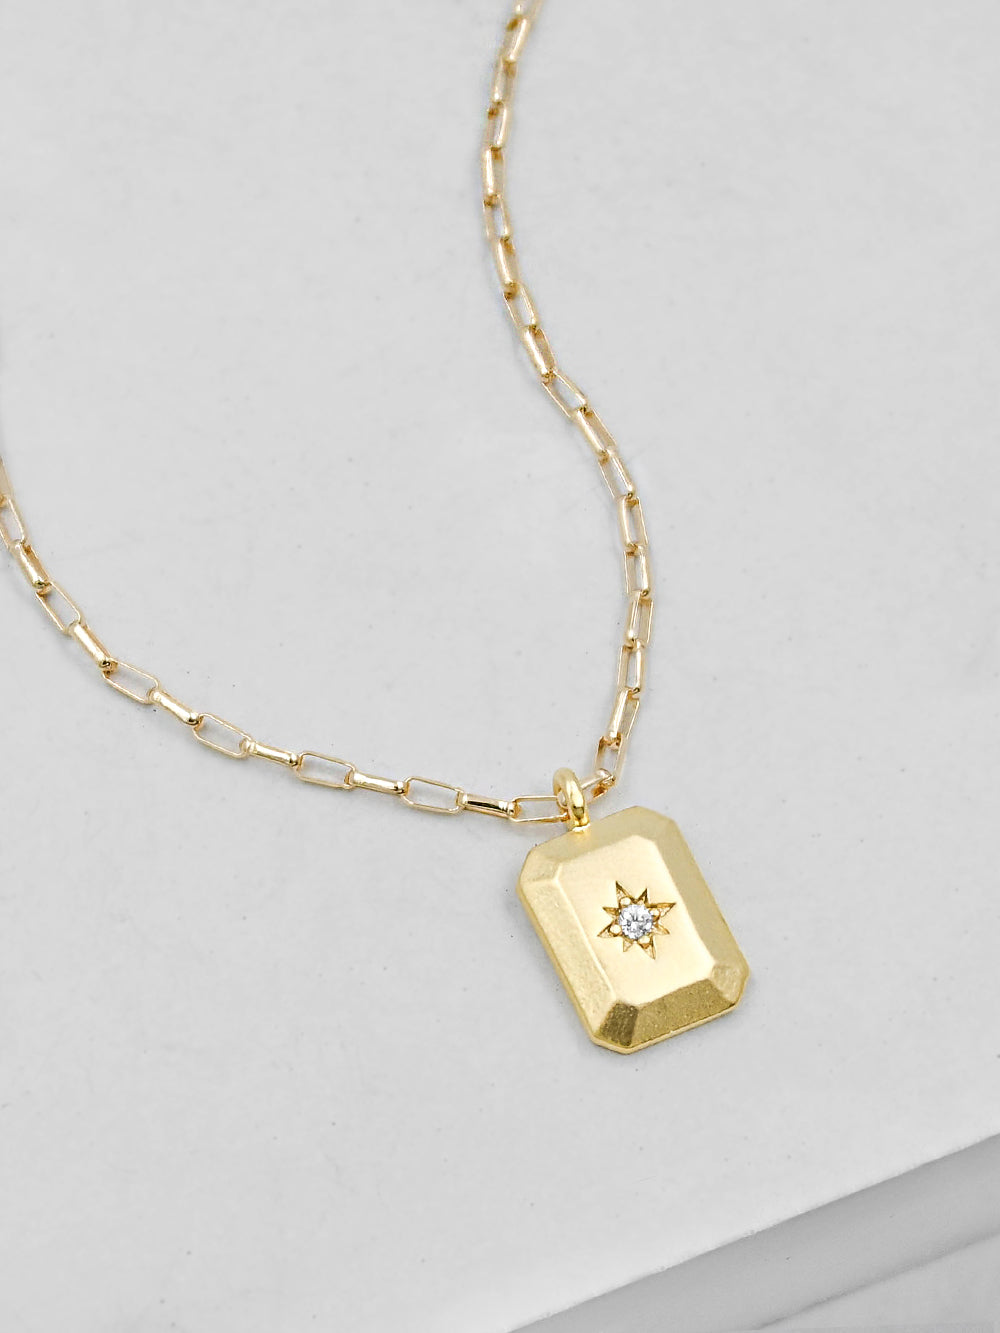 North star Tag Gold Necklace by The Faint Hearted Jewelry